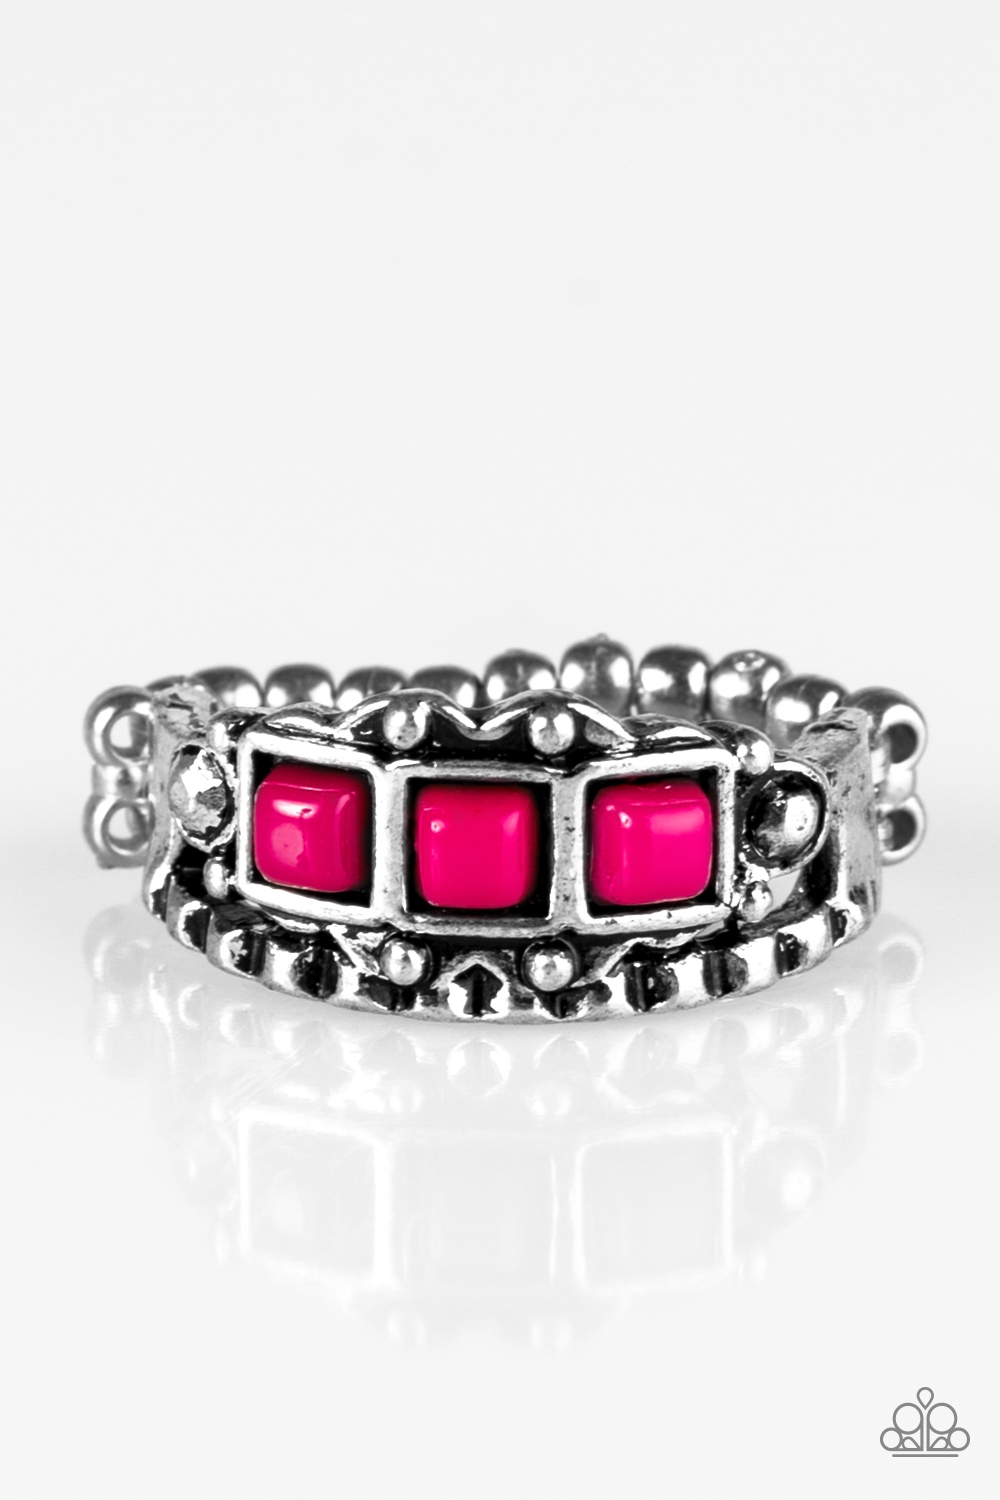 Paparazzi Accessories: Color Me EMPRESSed! - Pink